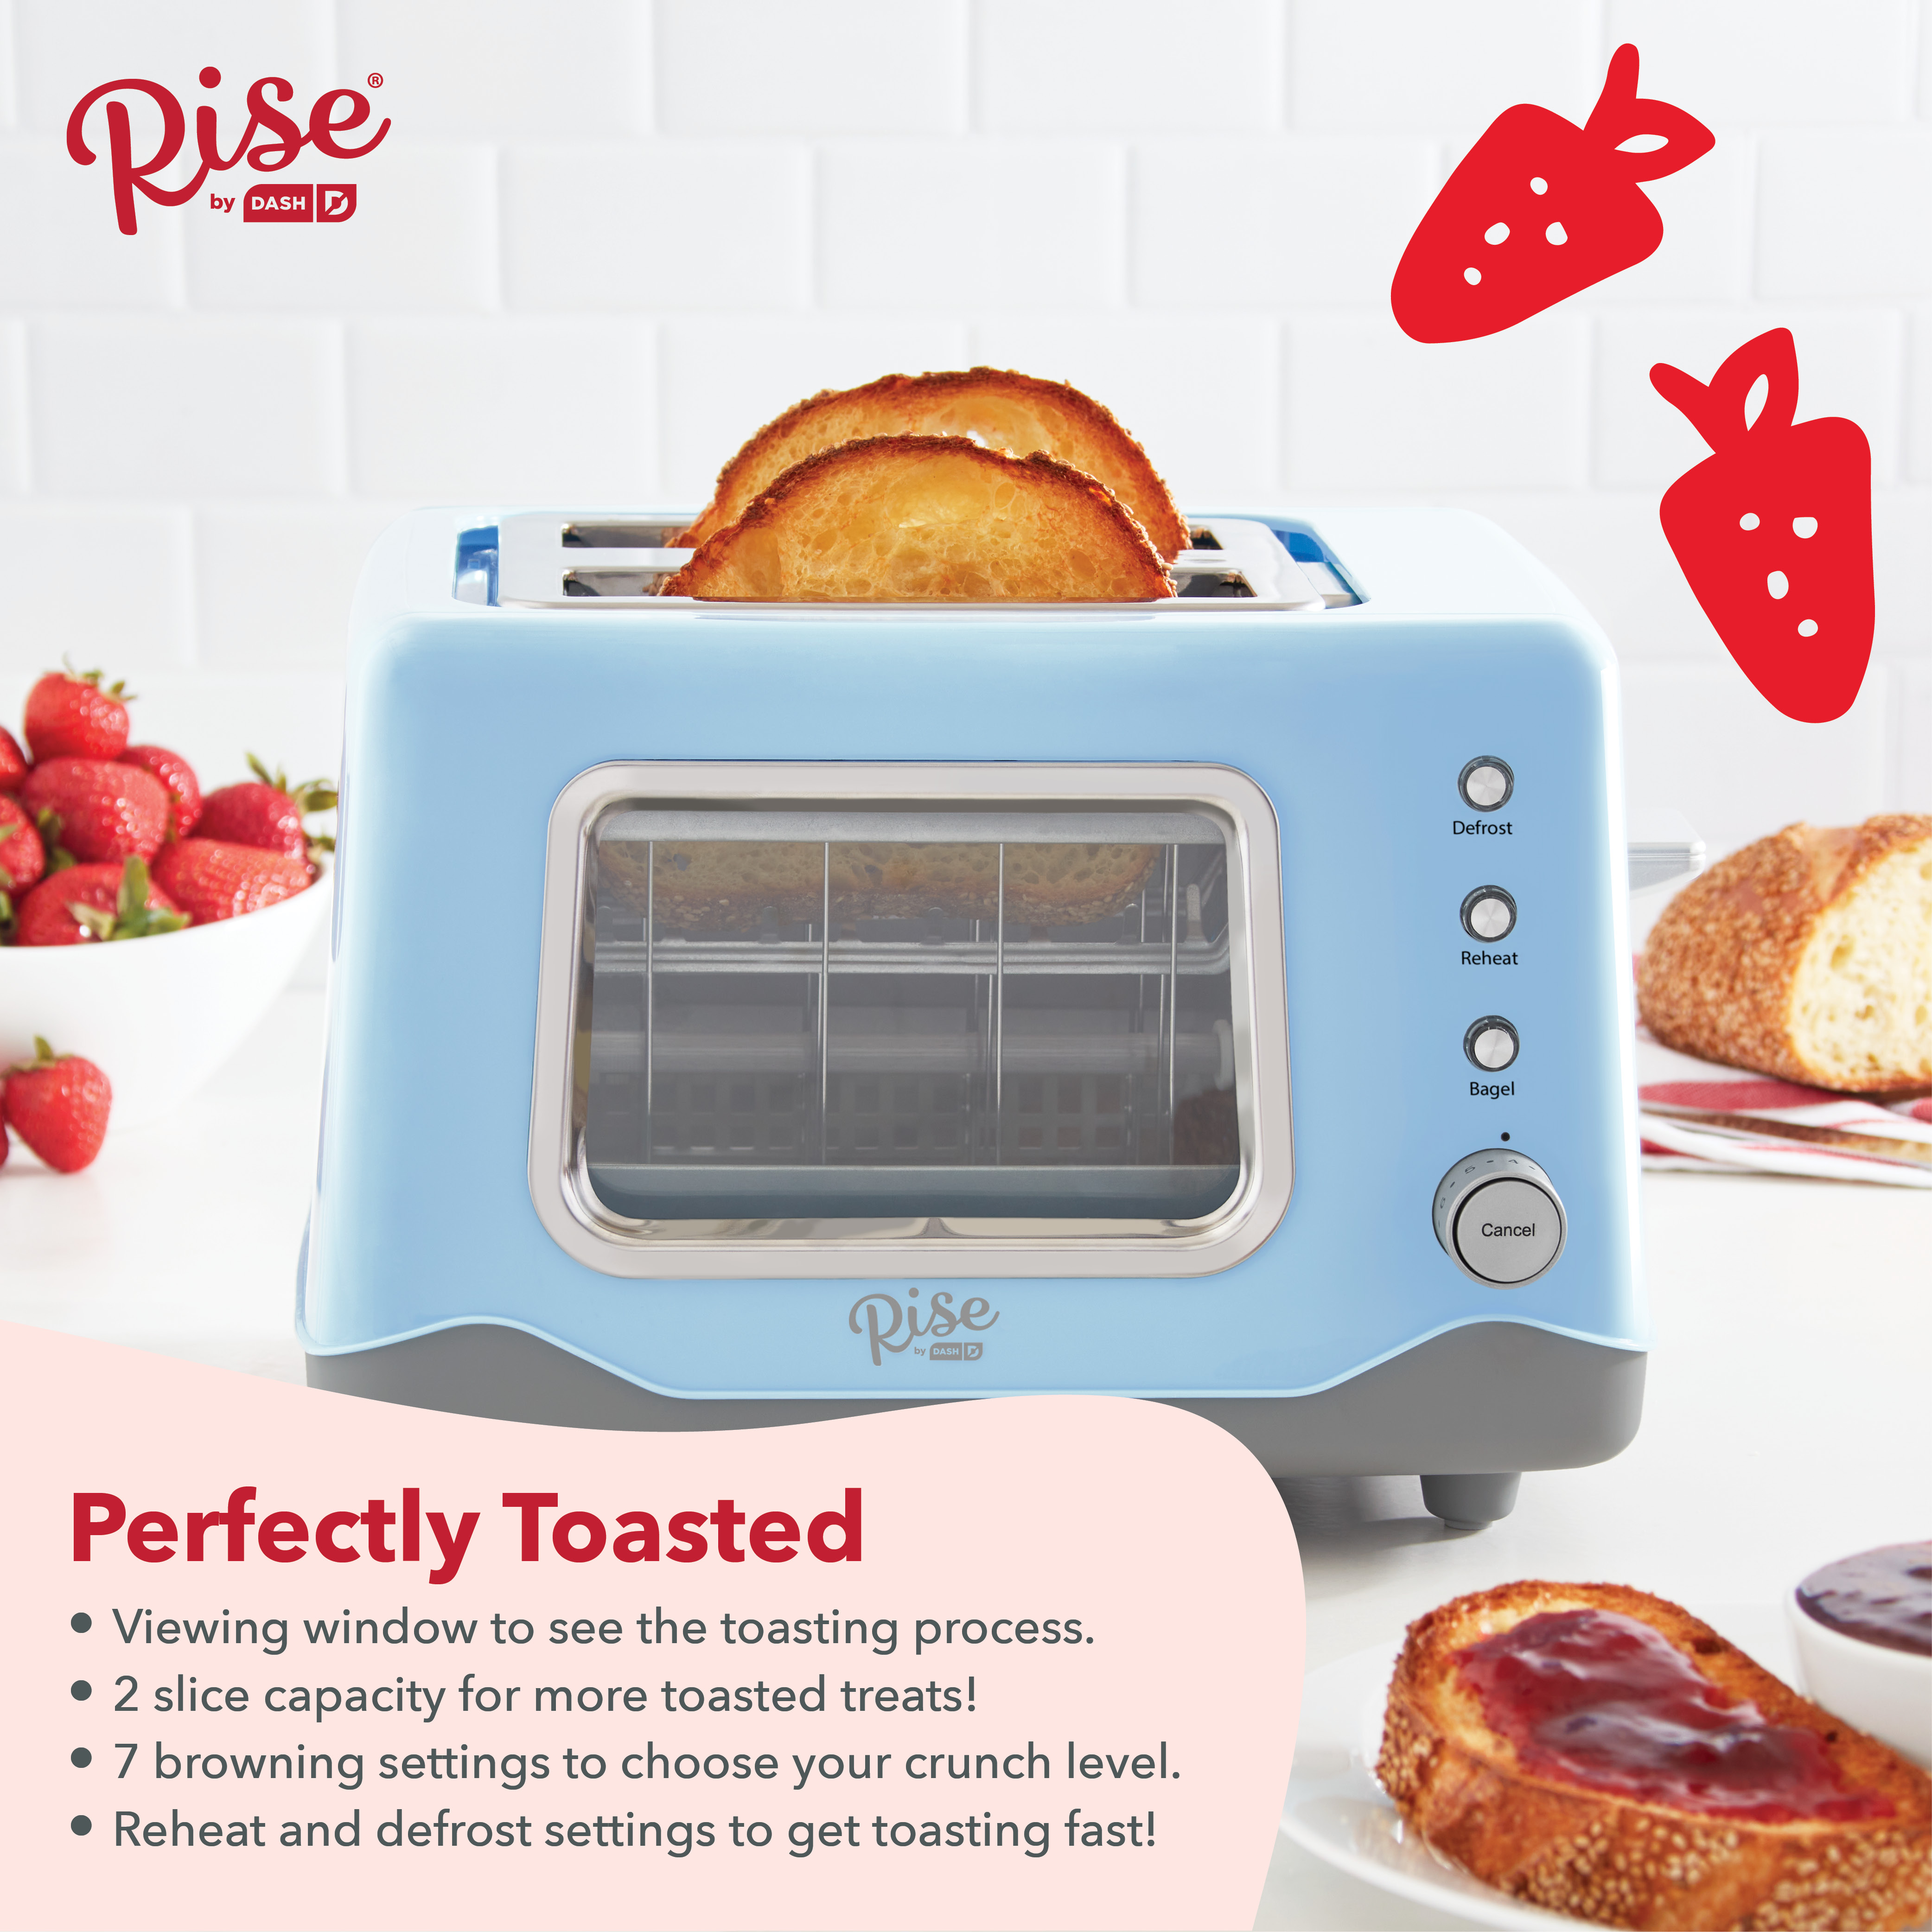 Rise by Dash Clear View Window 2-Slice Toaster Blue - Defrost, Reheat, Bagel, Auto Shut off, New - image 3 of 7